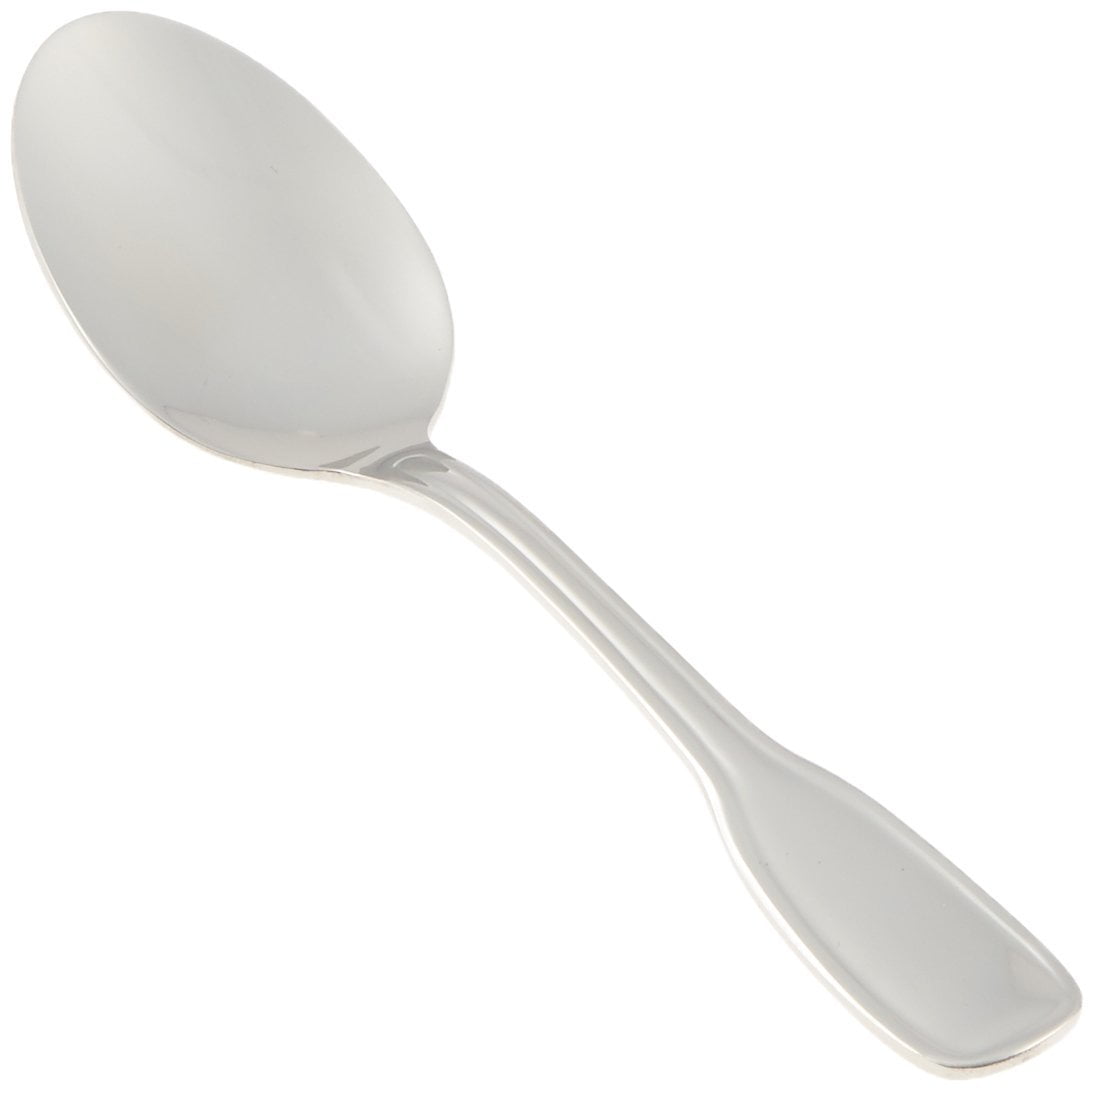 NEW Winco 0033-03 12-Piece Oxford Dinner Spoon Set 18-8 Stainless Steel 